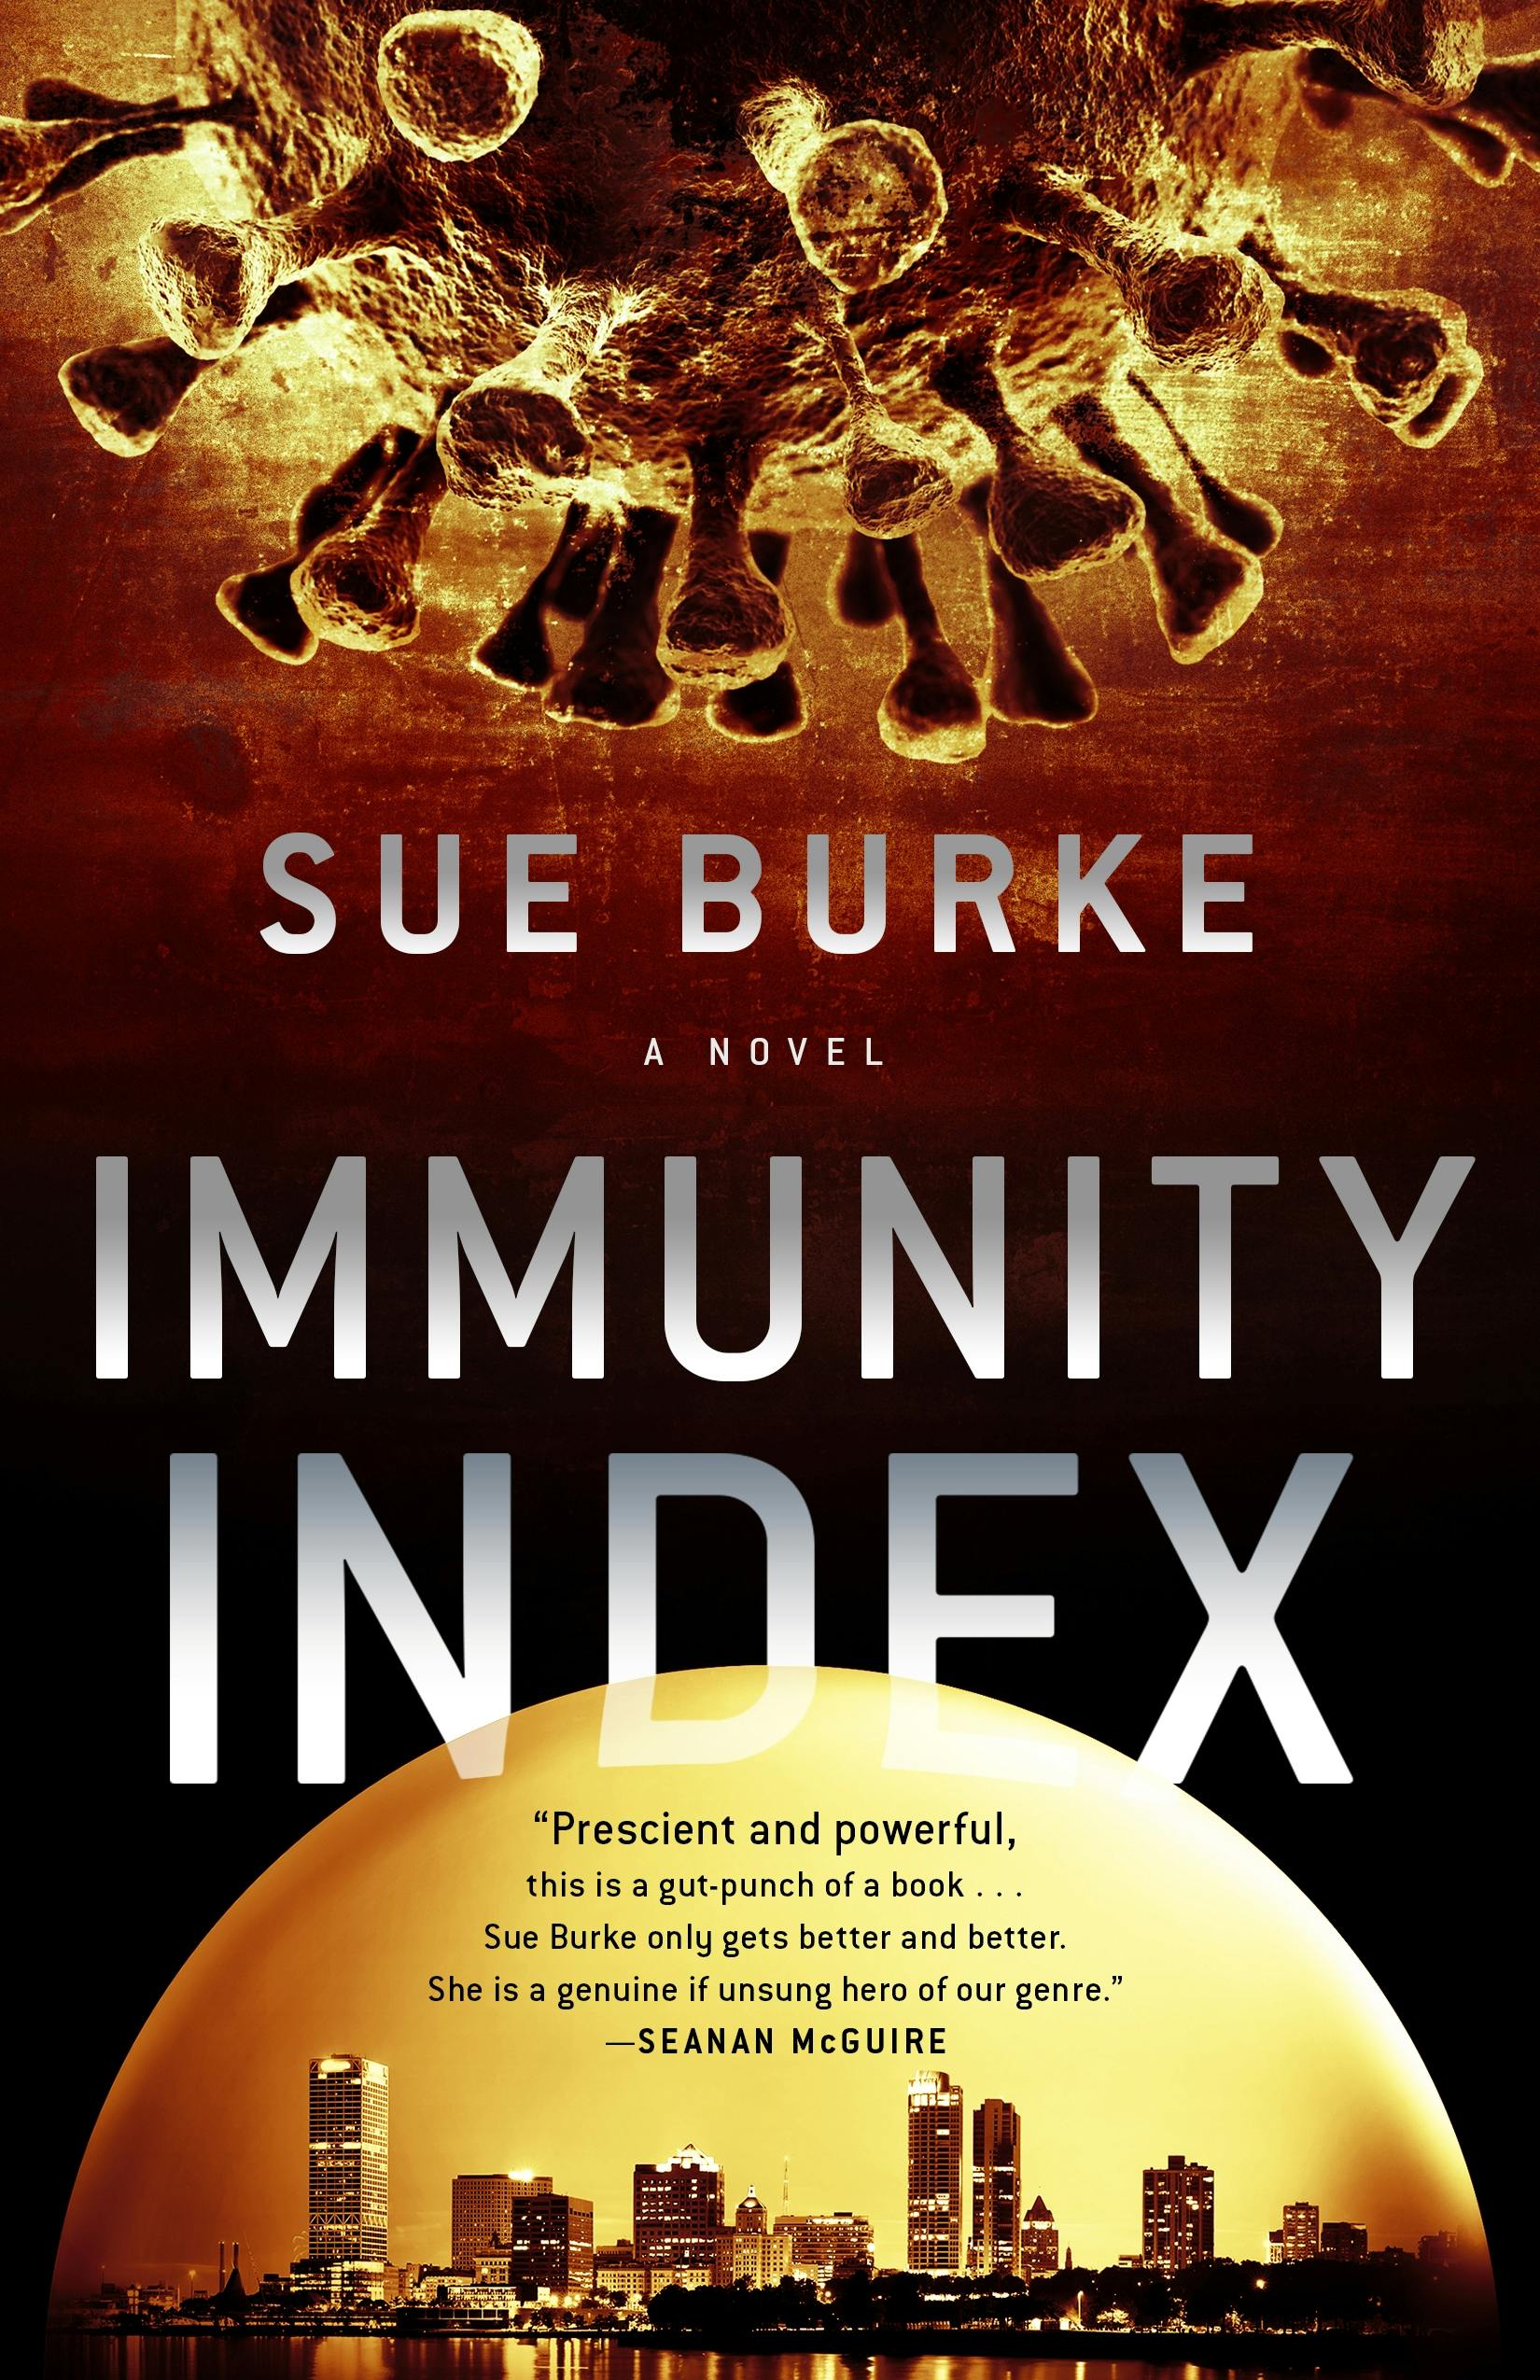 Cover for the book titled as: Immunity Index